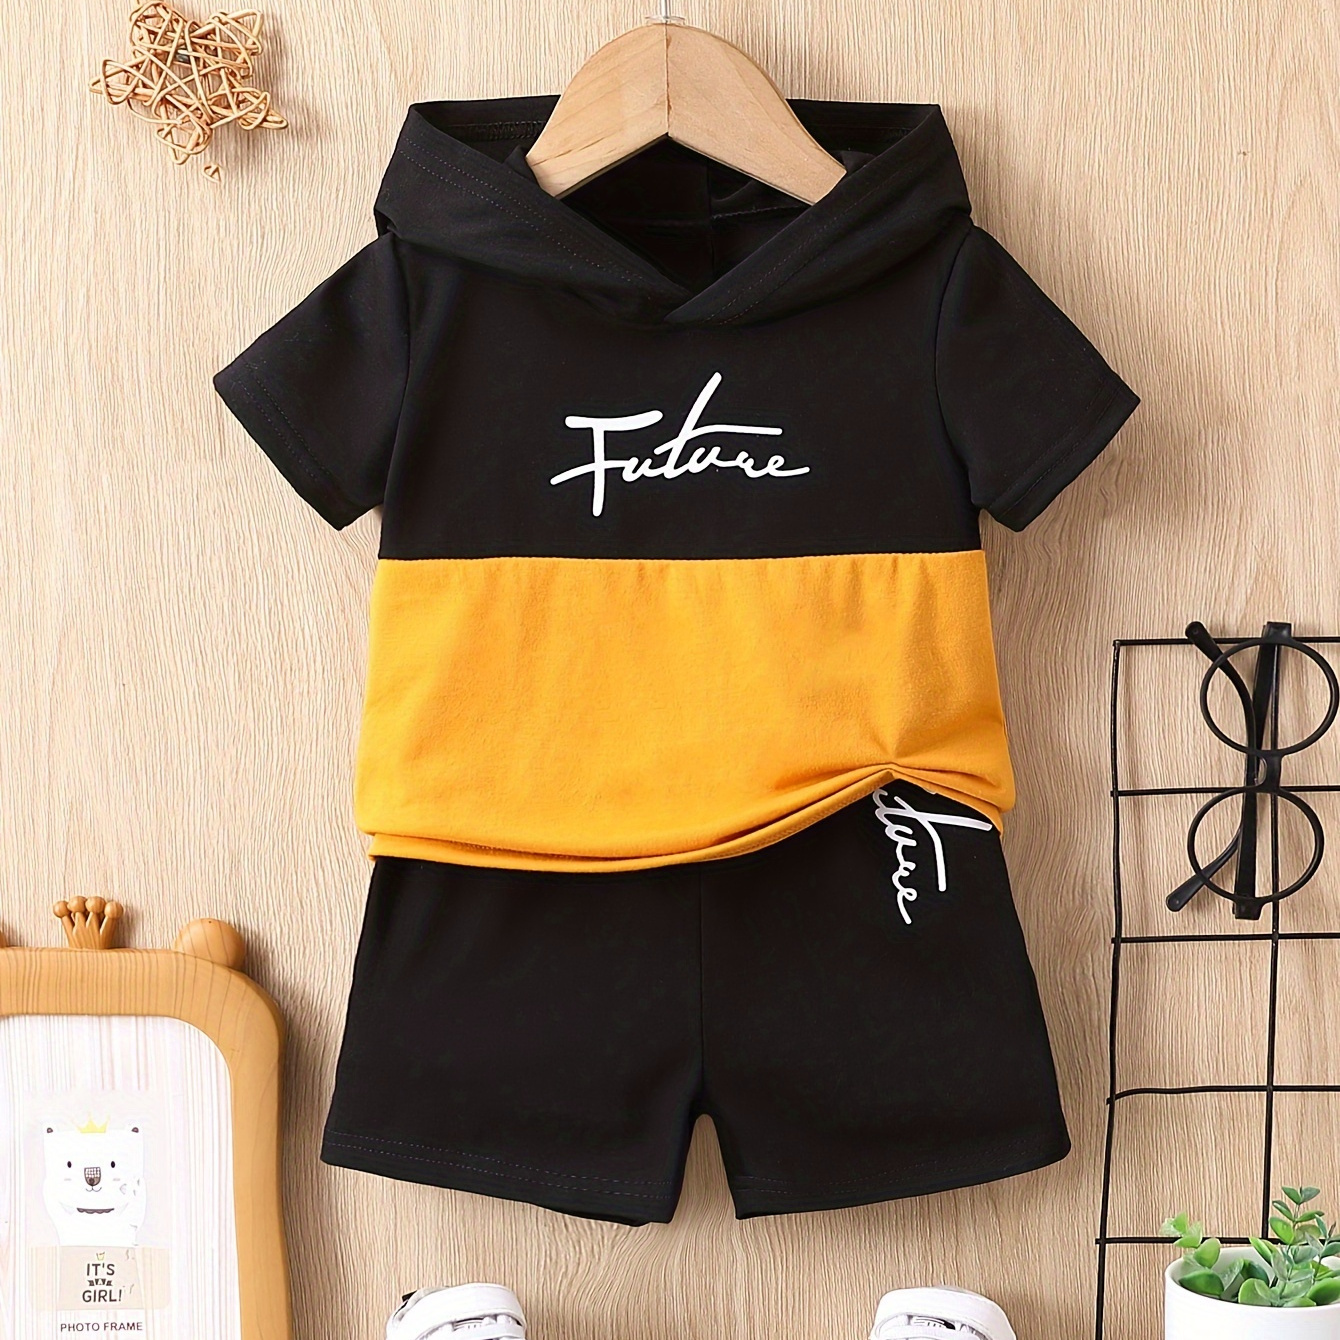 

2pcs Infant & Toddler's Future Print Summer Outfit, Color Clash Hooded T-shirt & Casual Shorts, Baby Boy's Clothes